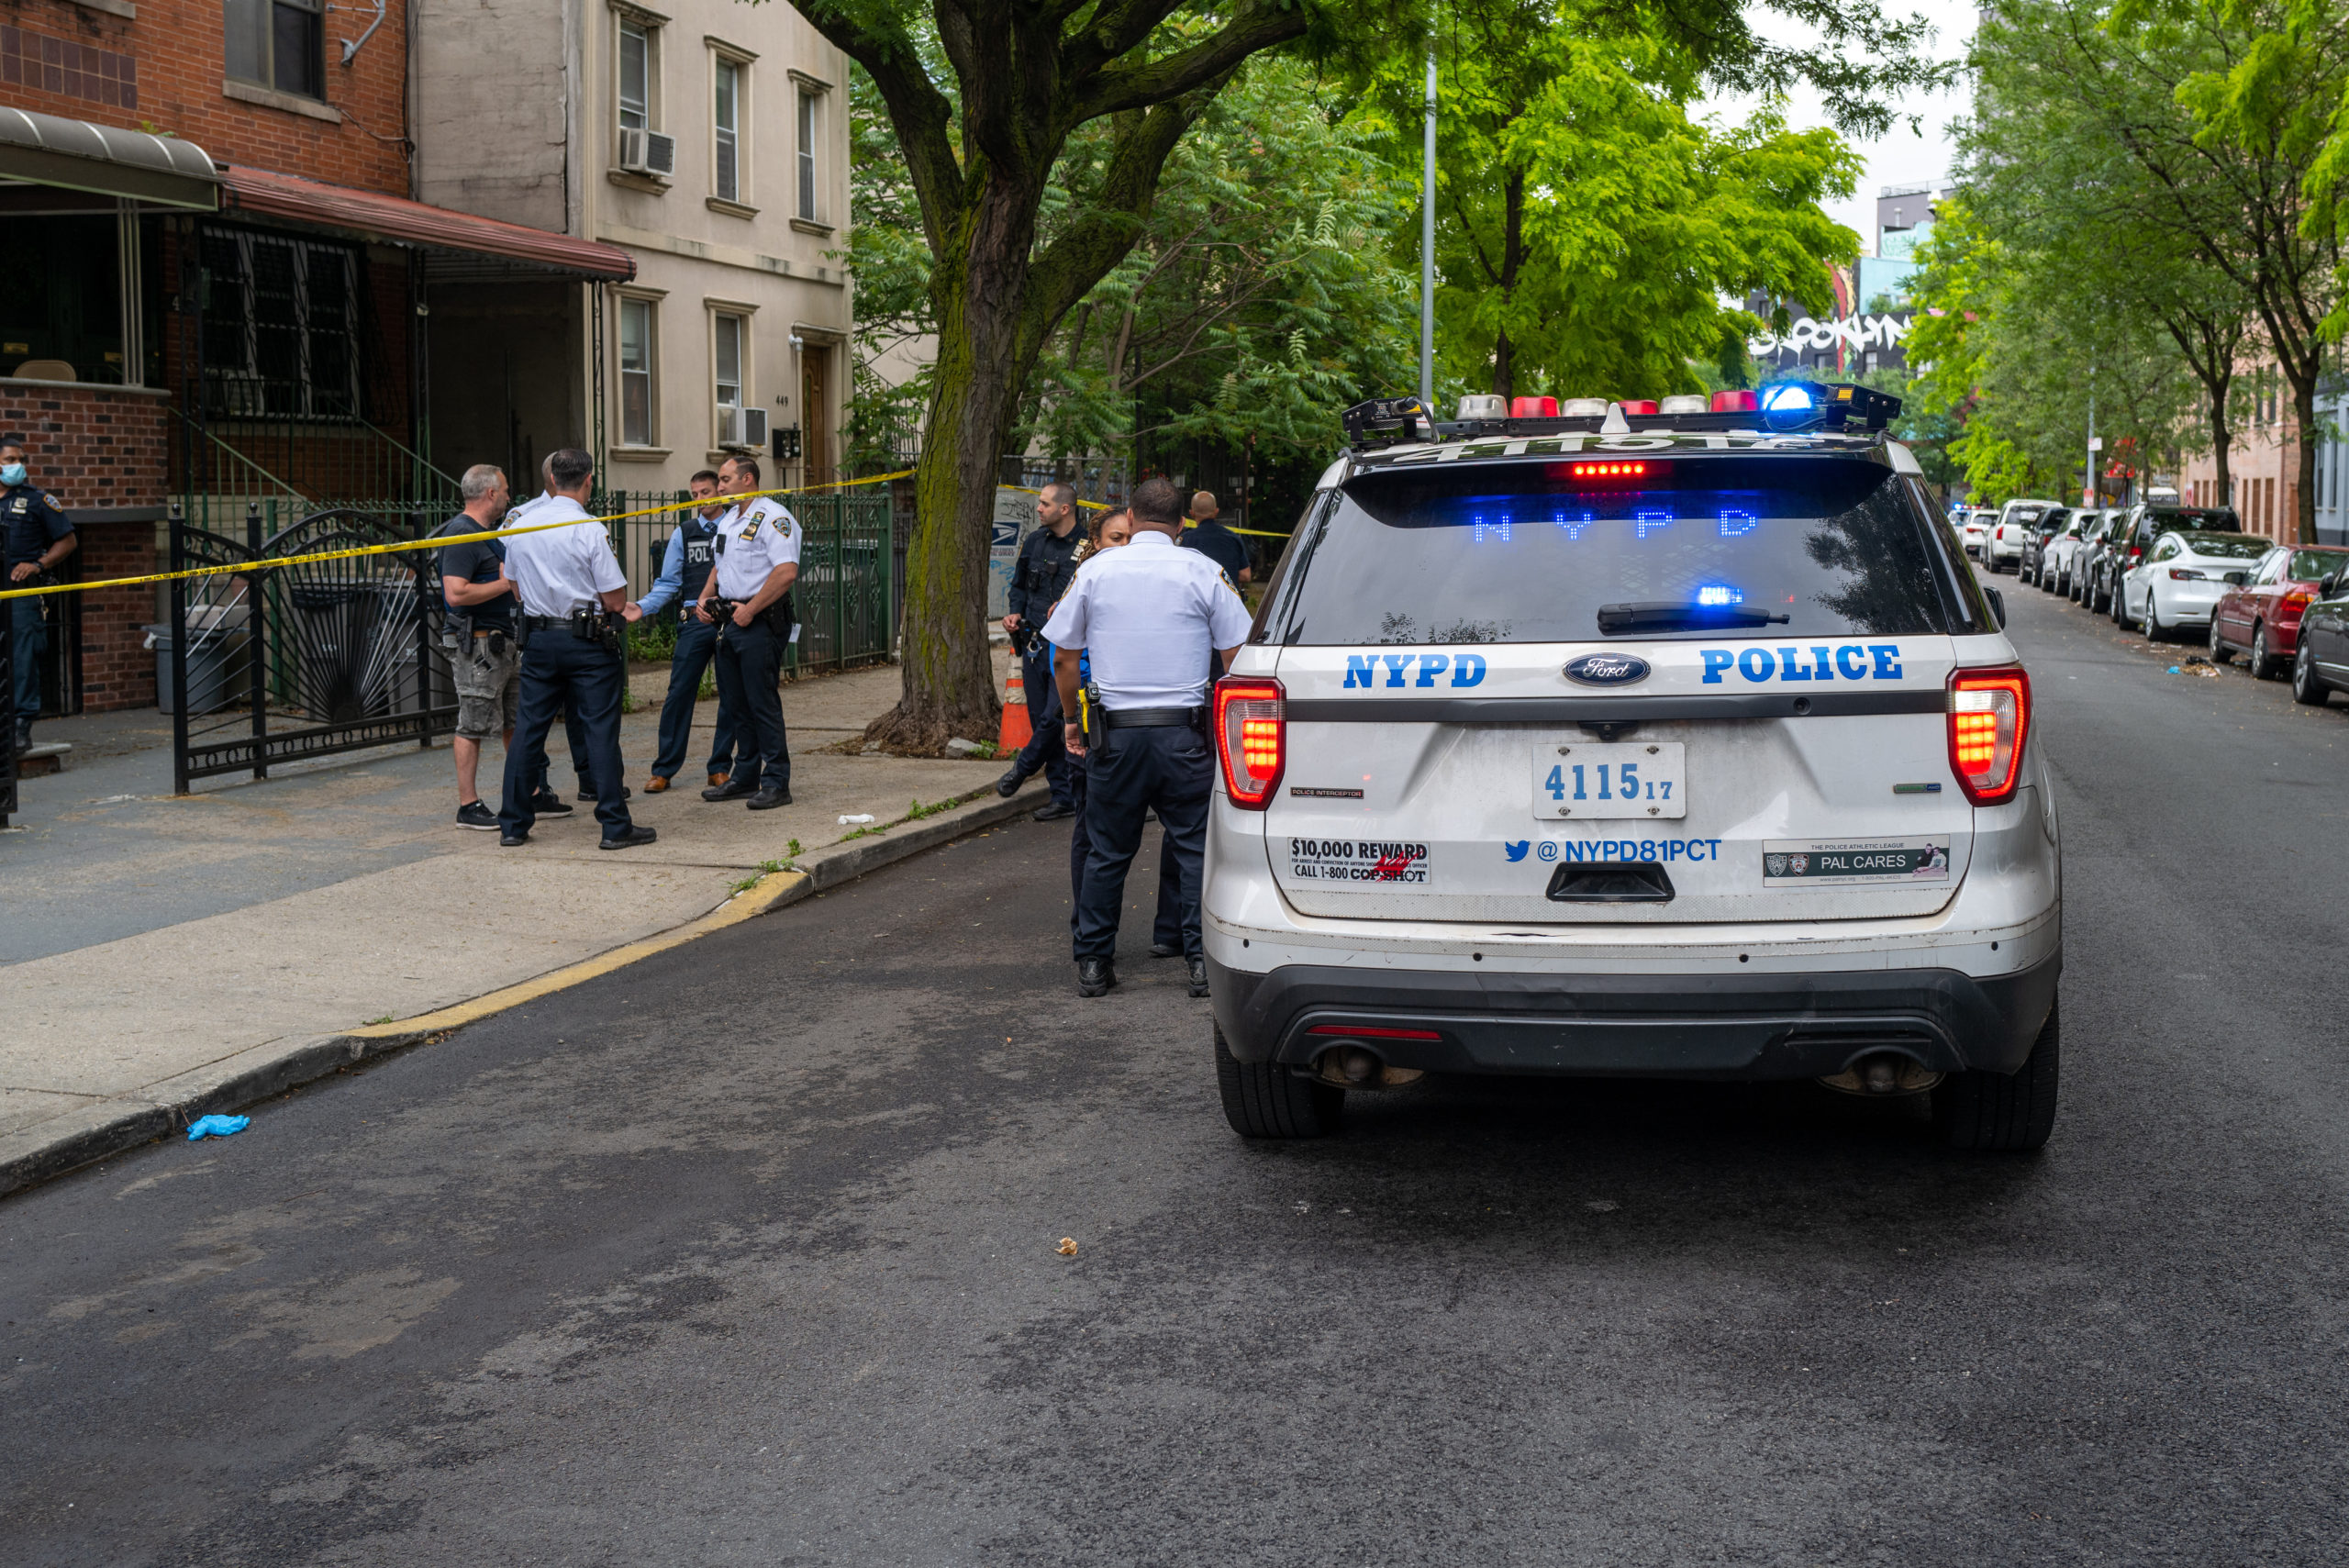 NEW YORK, NEW YORK - JUNE 16: Police gather at the scene of a shooting in Brooklyn that left one person dead on June 16, 2022 in New York City. While much of the nation has witnessed a rise in gun violence over the last year, police are anticipating a surge in shootings over the coming summer months. According to NYPD statistics, a total of 656 people have been shot in 559 incidents so far this year. (Photo By Spencer Platt/Getty Images)